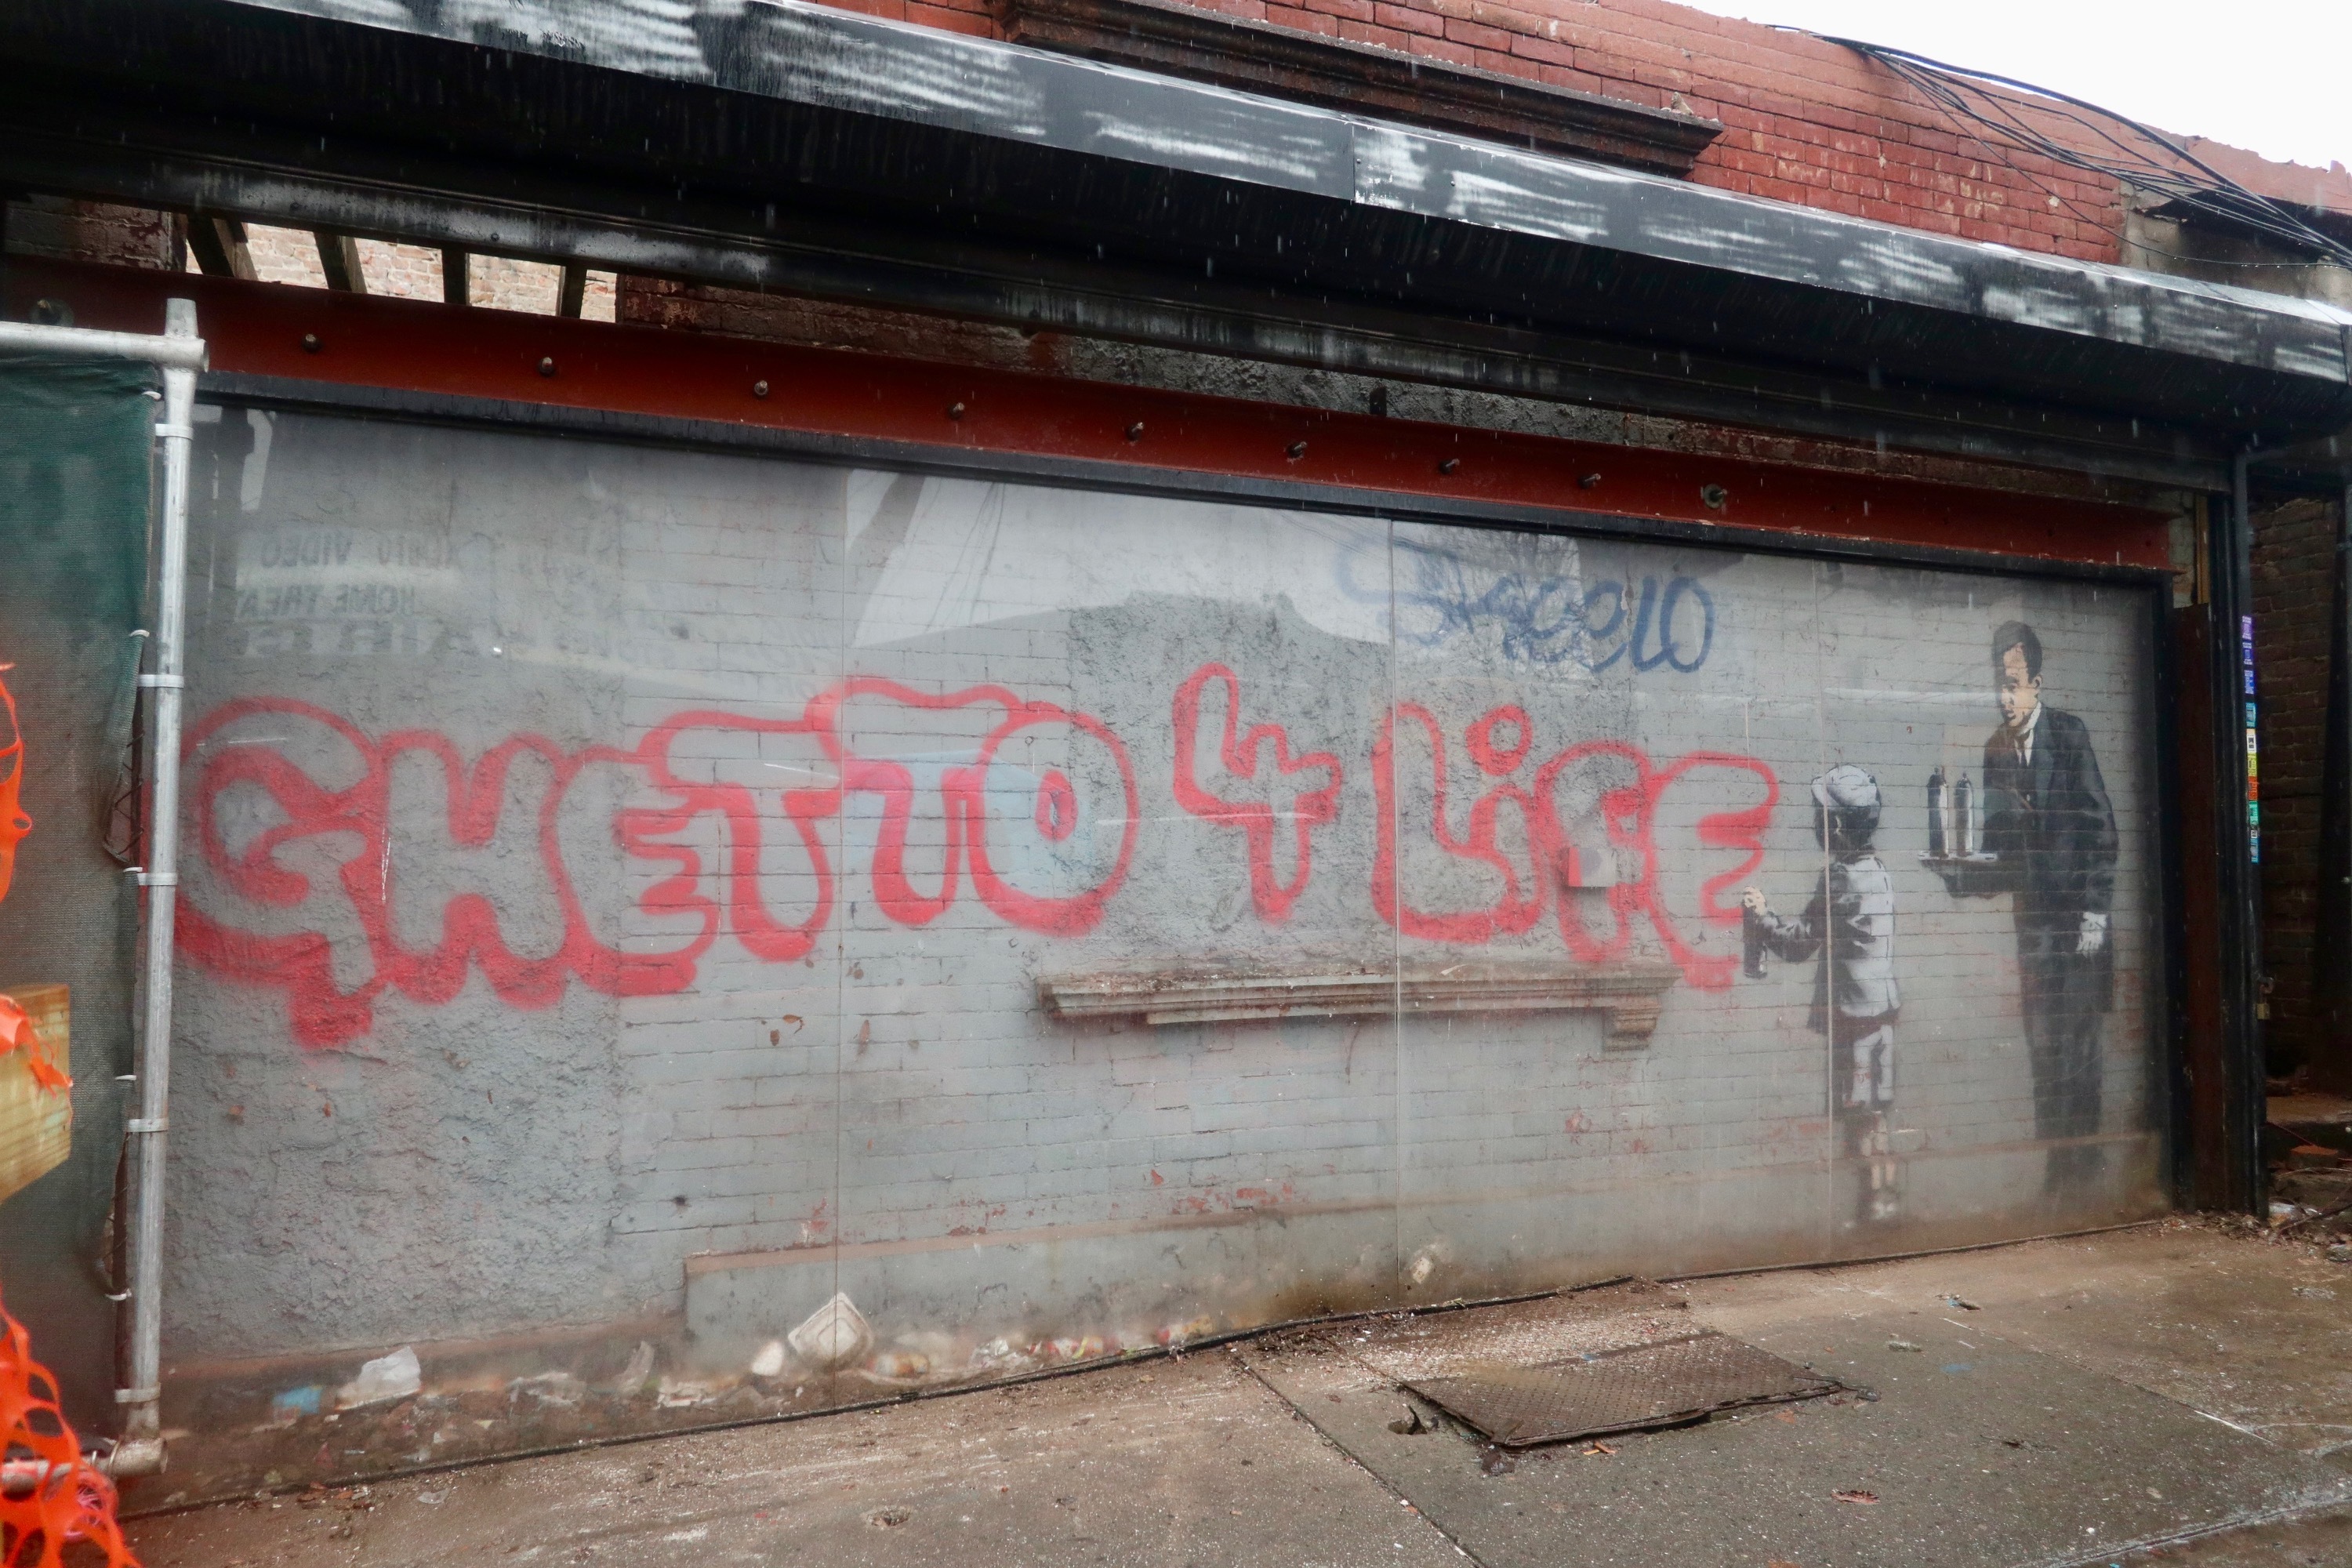 one of nyc’s last public banksy works moving from bronx to bridgeport: exclusive